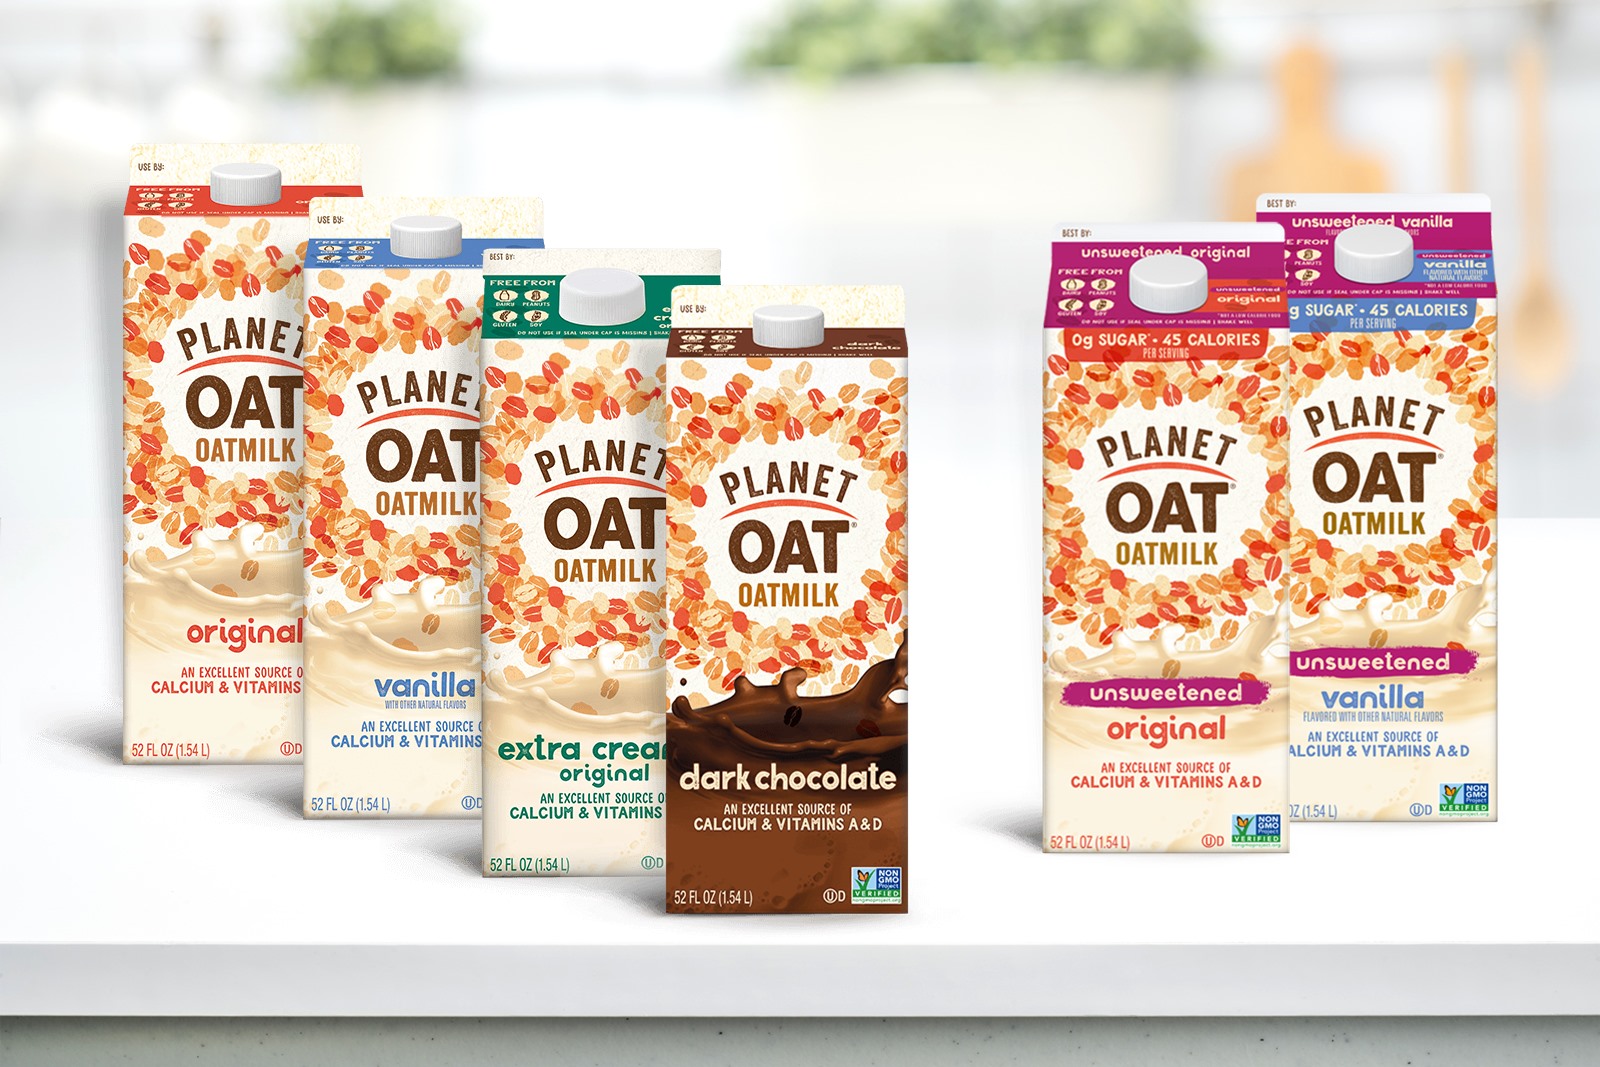 Planet Oat Oatmilk Revew - ratings, ingredients, allergen info, certifications and more! It's dairy-free, nut-free, soy-free, vegan and labeled as gluten-free.